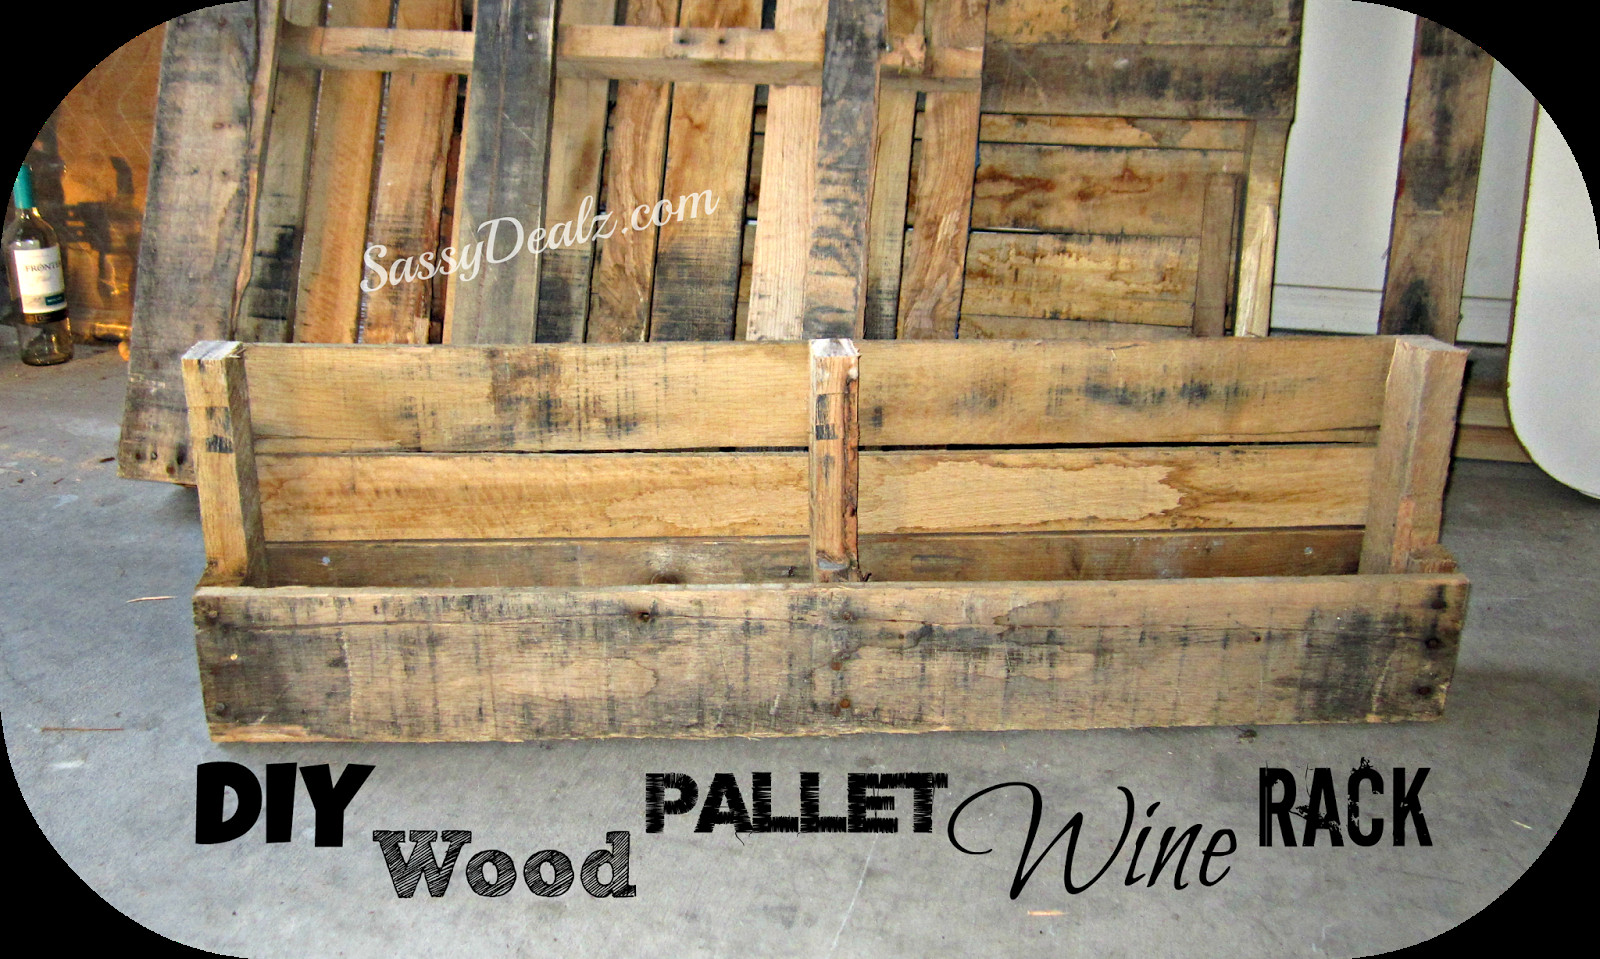 Wood Pallet Wine Rack DIY
 DIY How To Make A Wine or Magazine Rack Out of a Wood